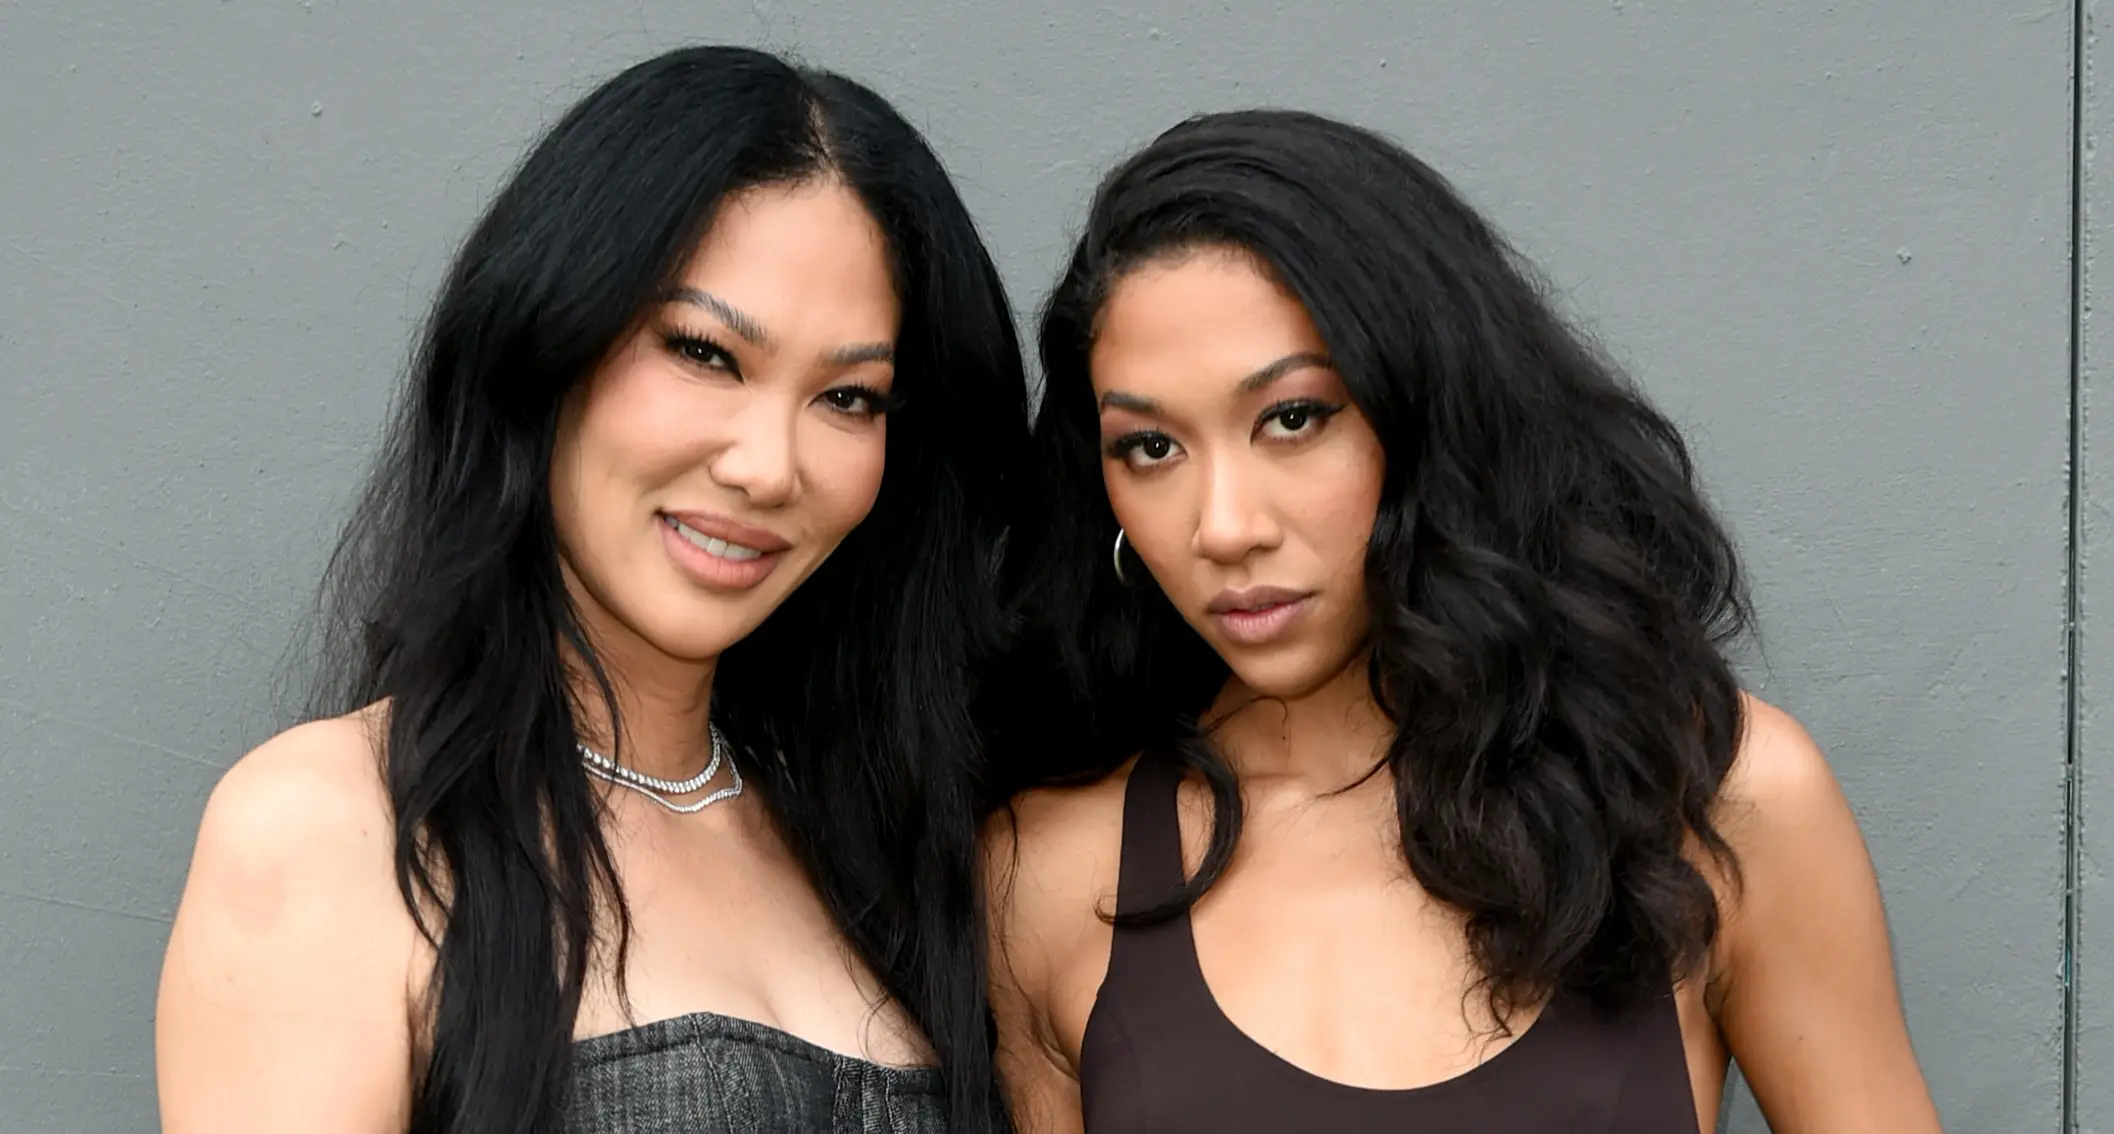 Aoki Lee Simmons, 21, Shares Cryptic Post After Mom Kimora Said She Was ‘Embarrassed’ by Those Kissing Photos of Her with 65 Year Old Man